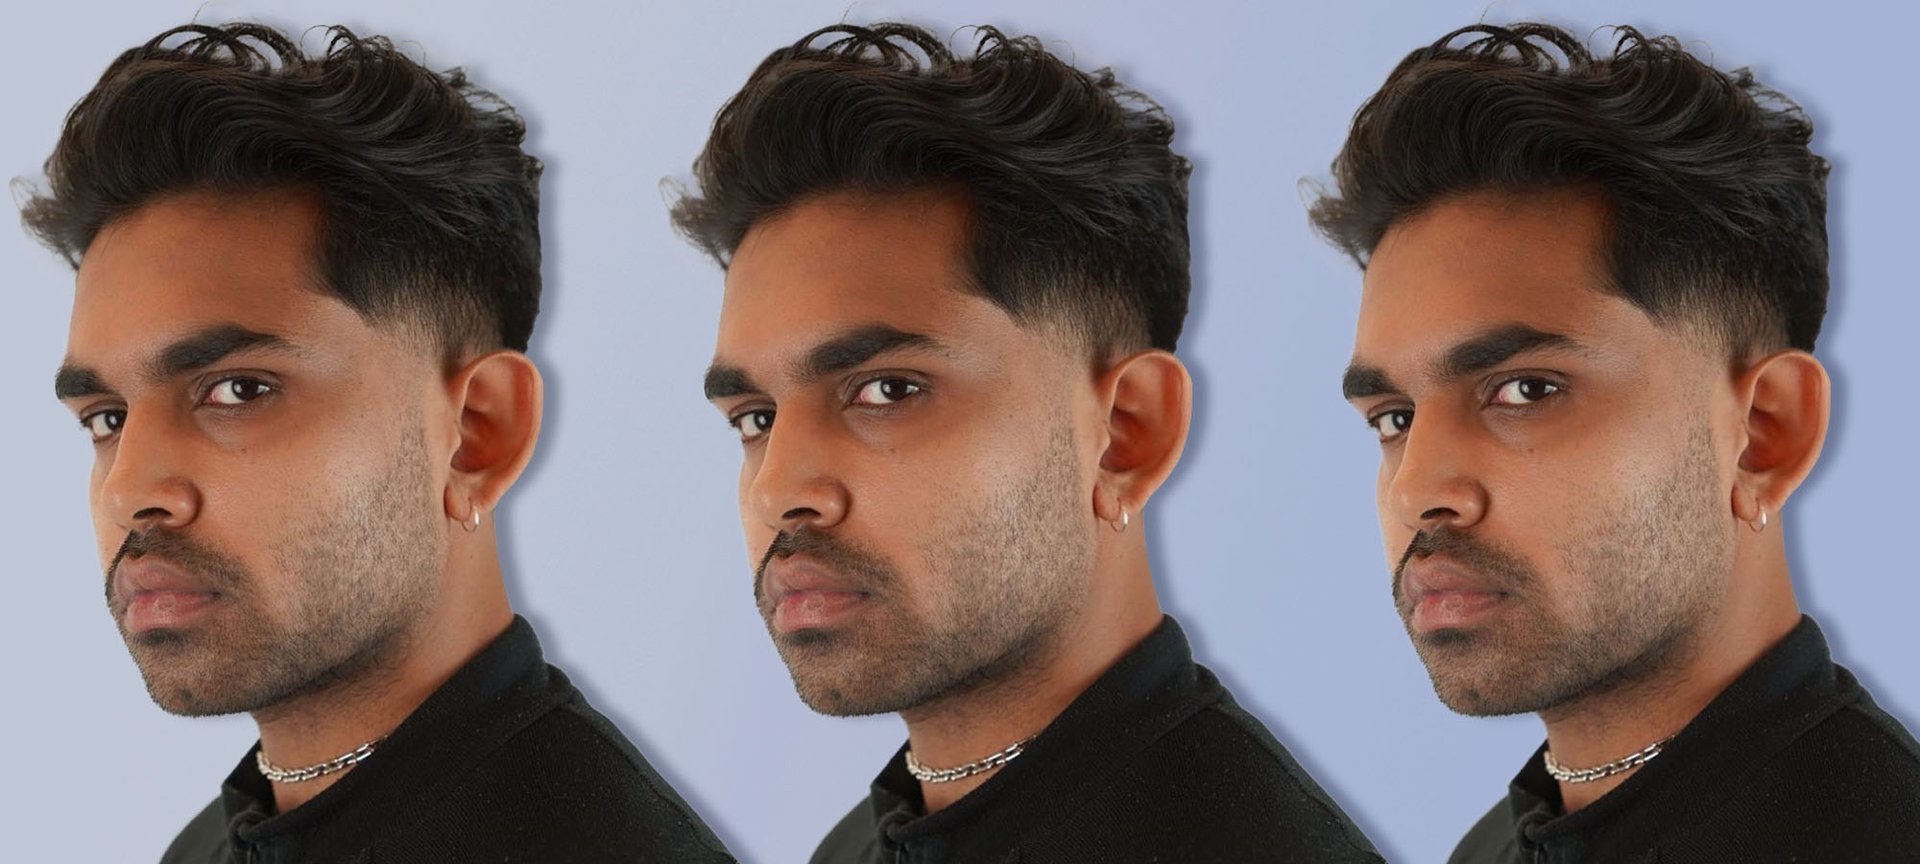 5 Different Haircut Styles With Their Name for Men 